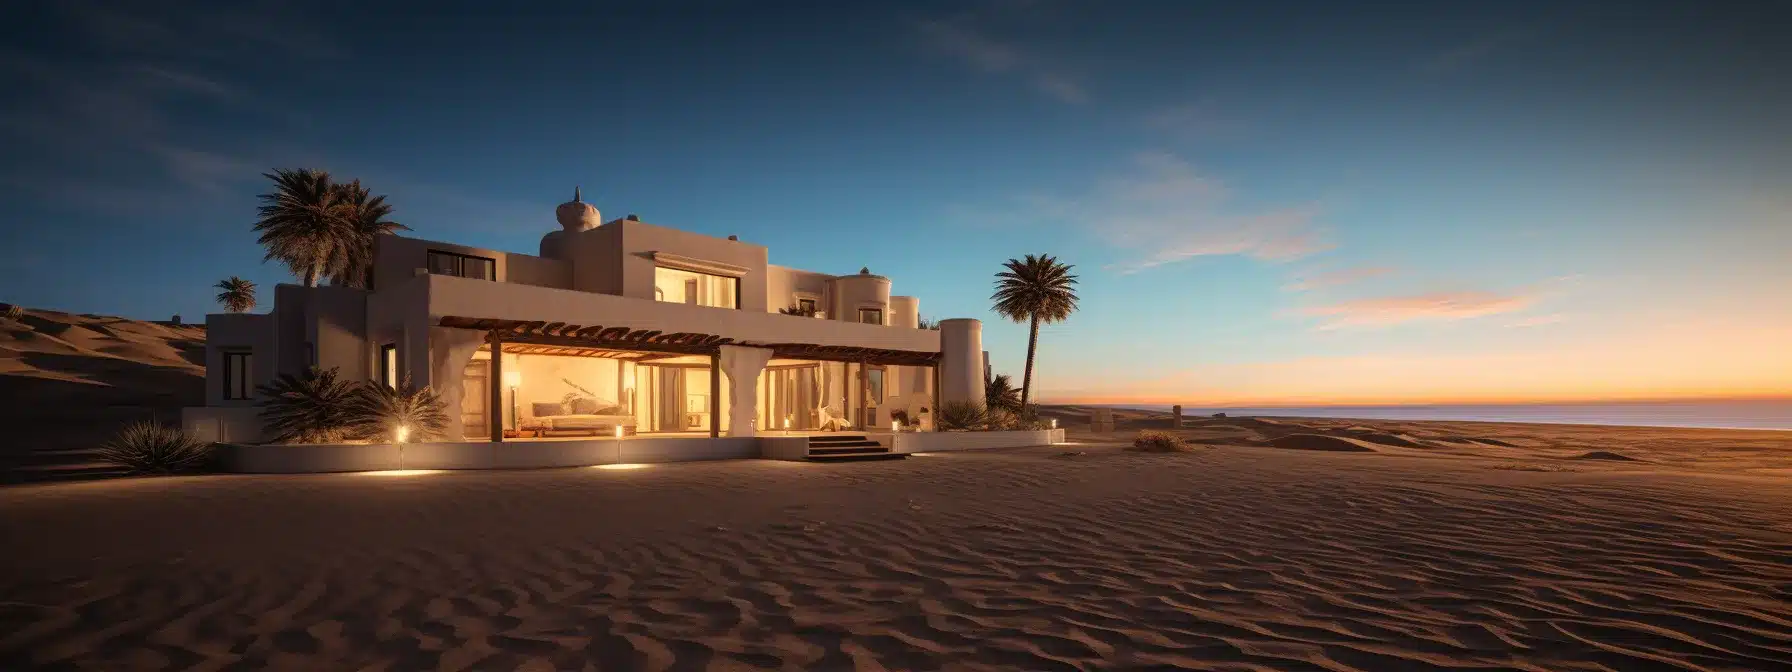 A Solid Brand Strategy Is Portrayed As A Foundation Of A Mansion In A Sandy Desert.